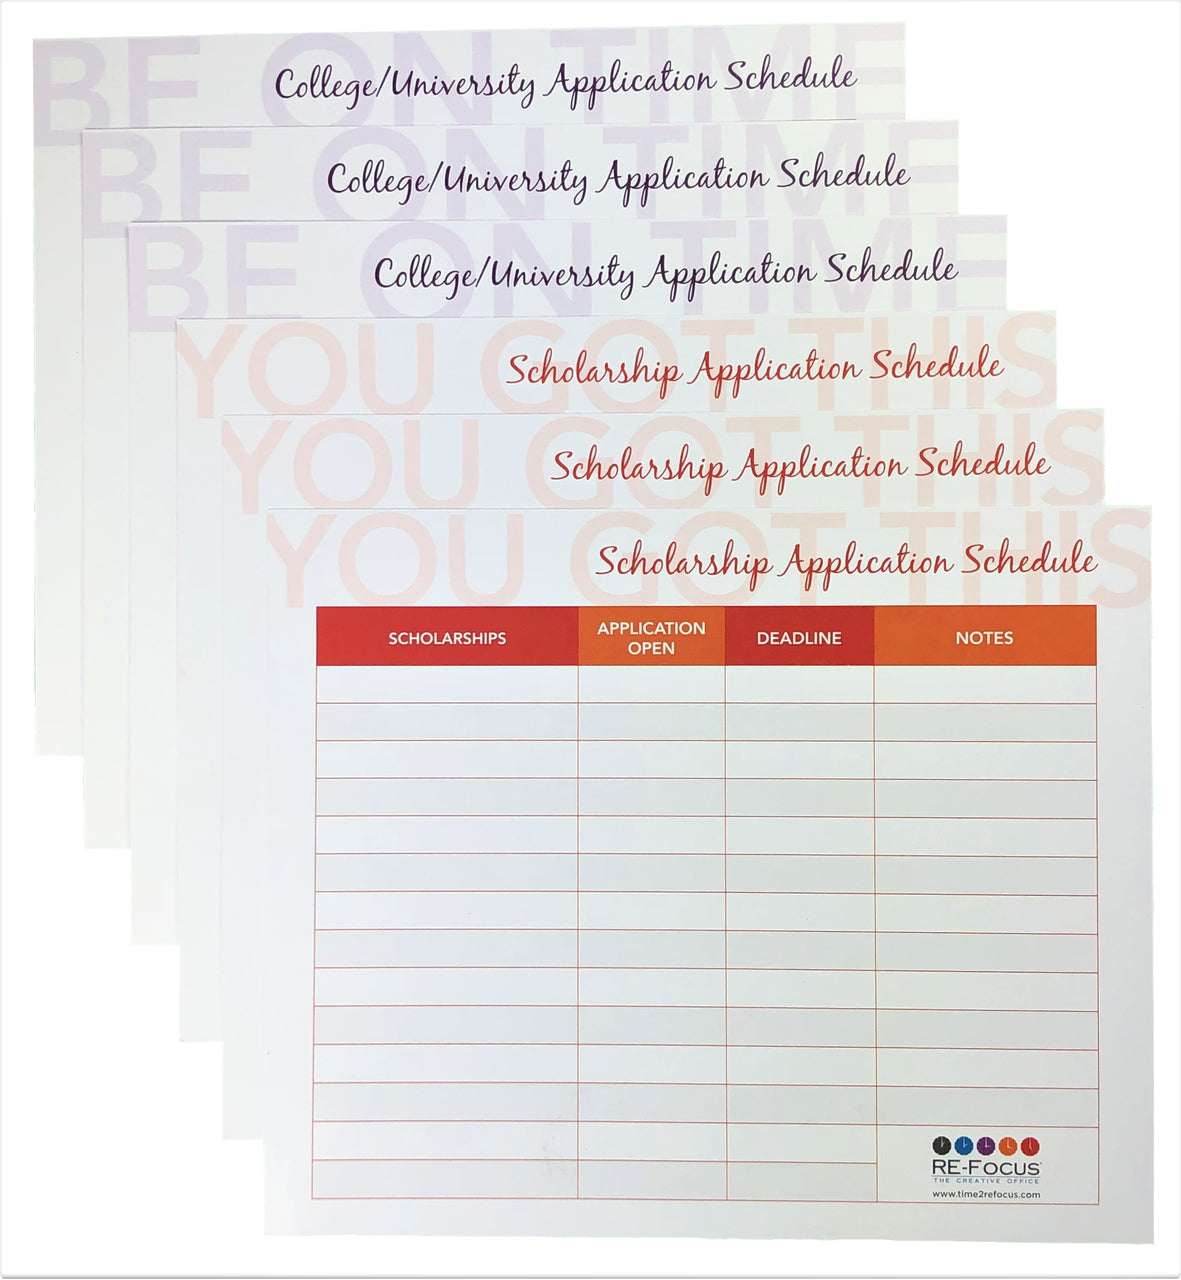 College/University & Scholarship Timeline/Organizer/Planner by RE-FOCUS THE CREATIVE OFFICE